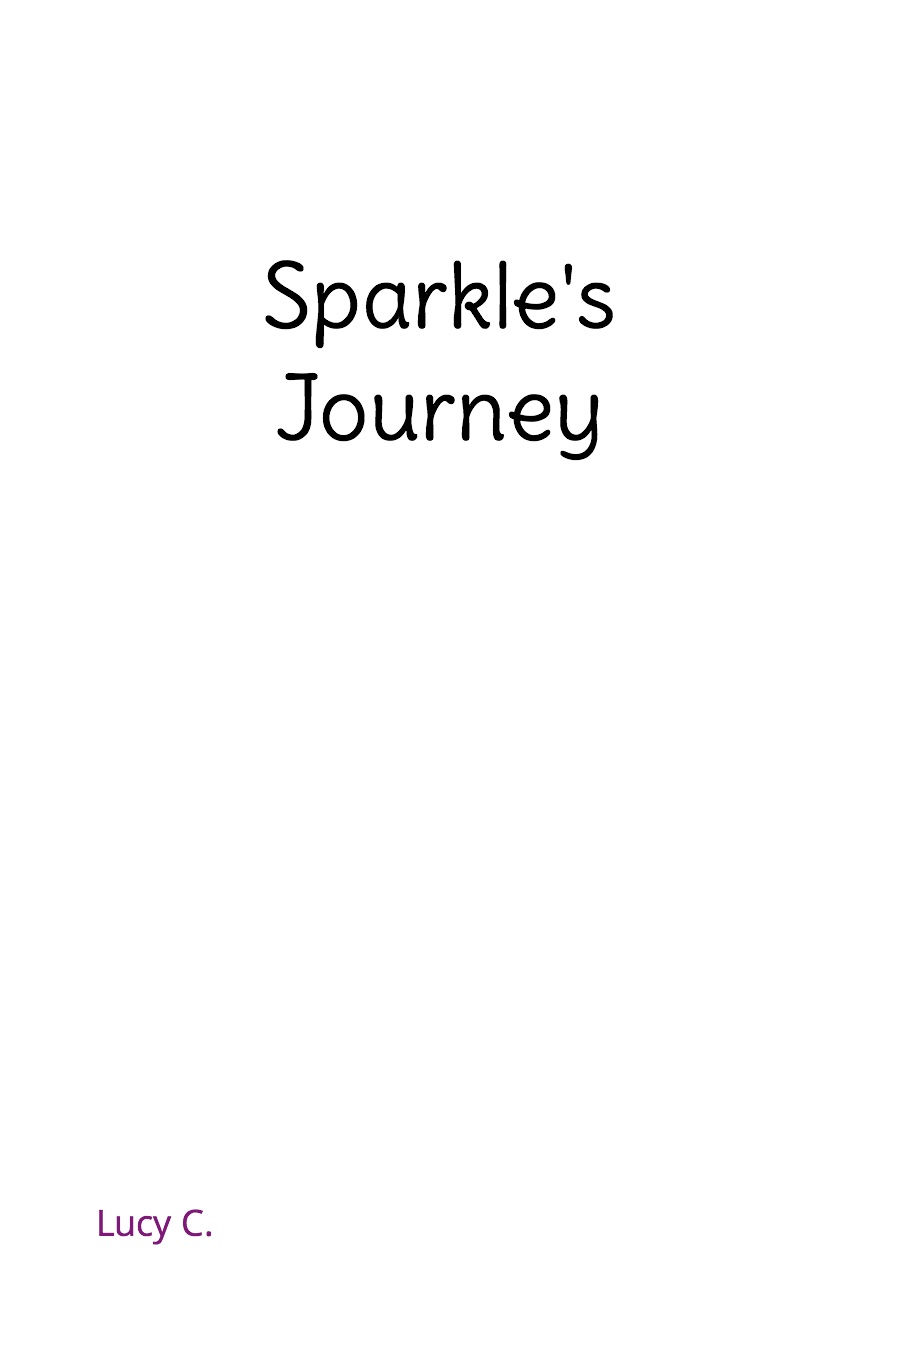 Sparkle’s Journey by Lucy C